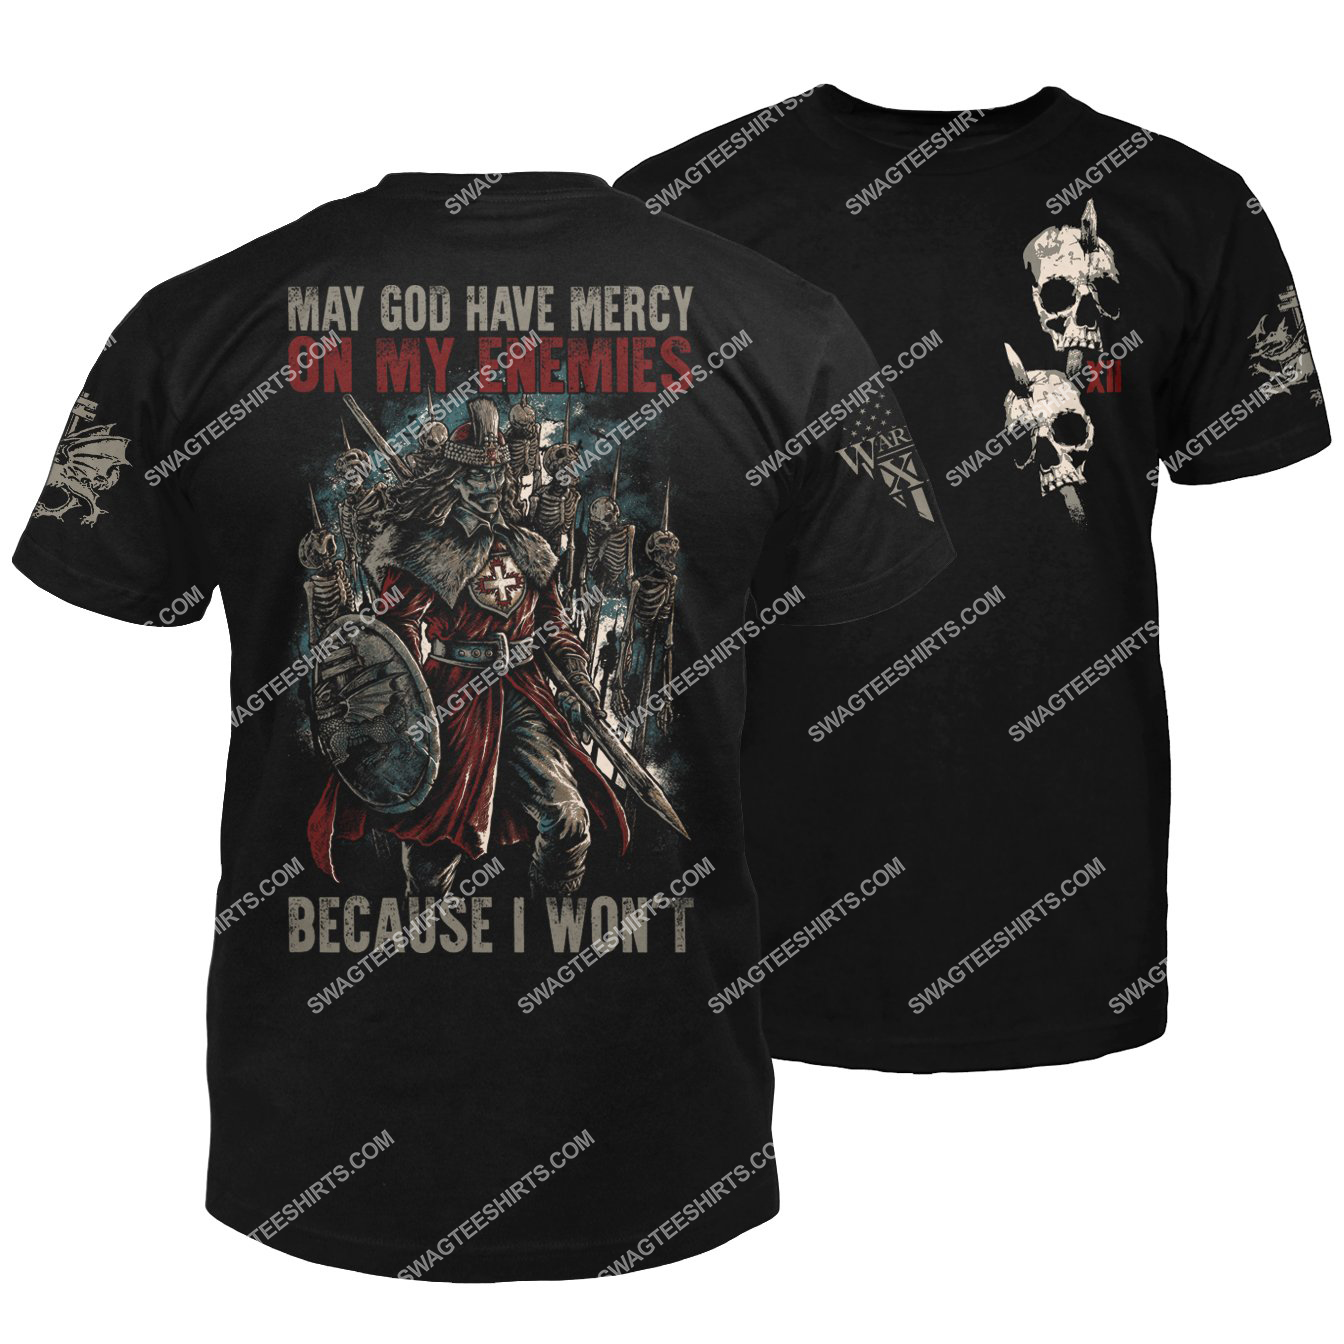 may God have mercy on my enemies because i won't vlad the impaler halloween shirt 1 - Copy (2)